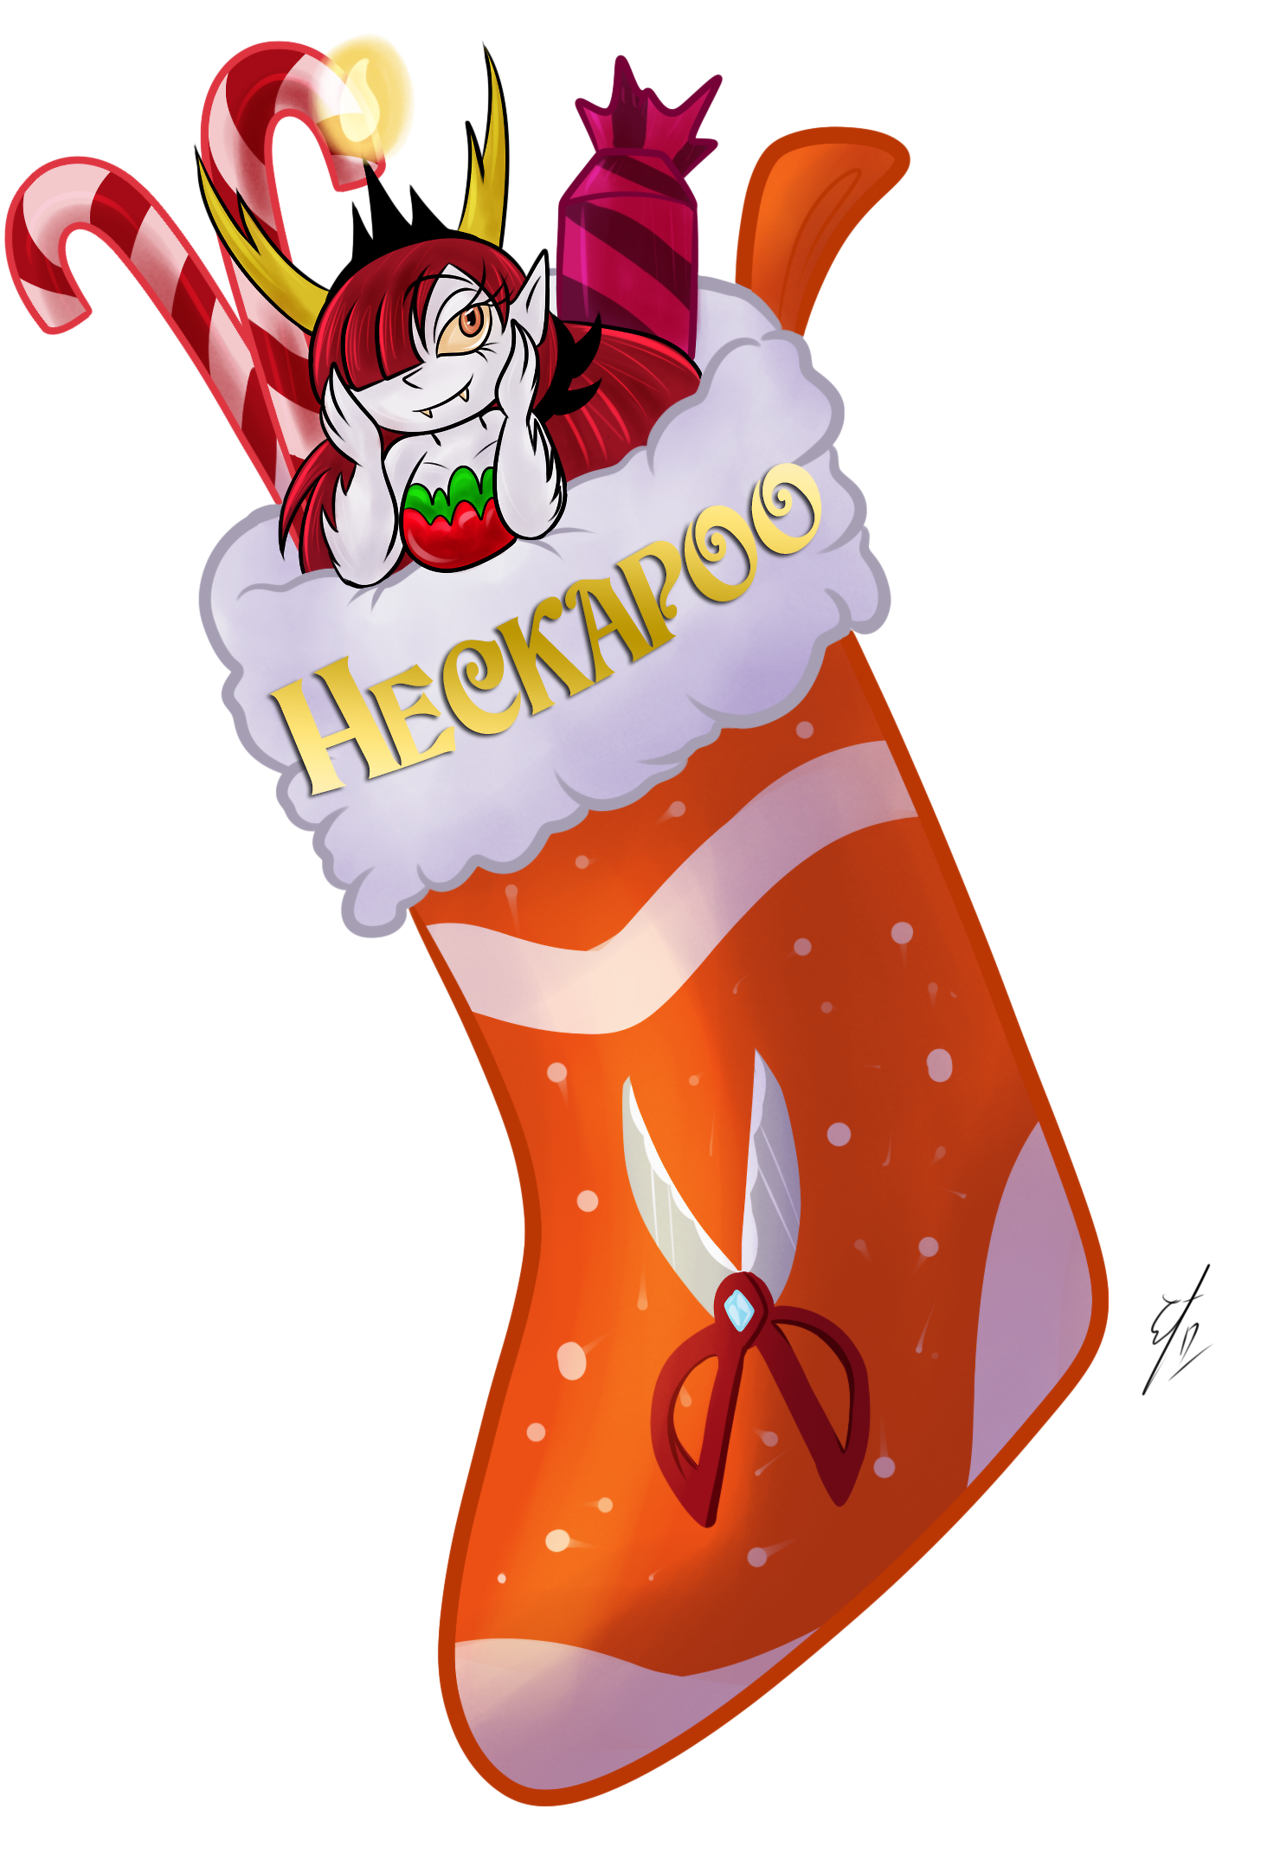 twisted-art-wounders: And a Heckapoo I want hekapoo in my stocking this year &lt;3